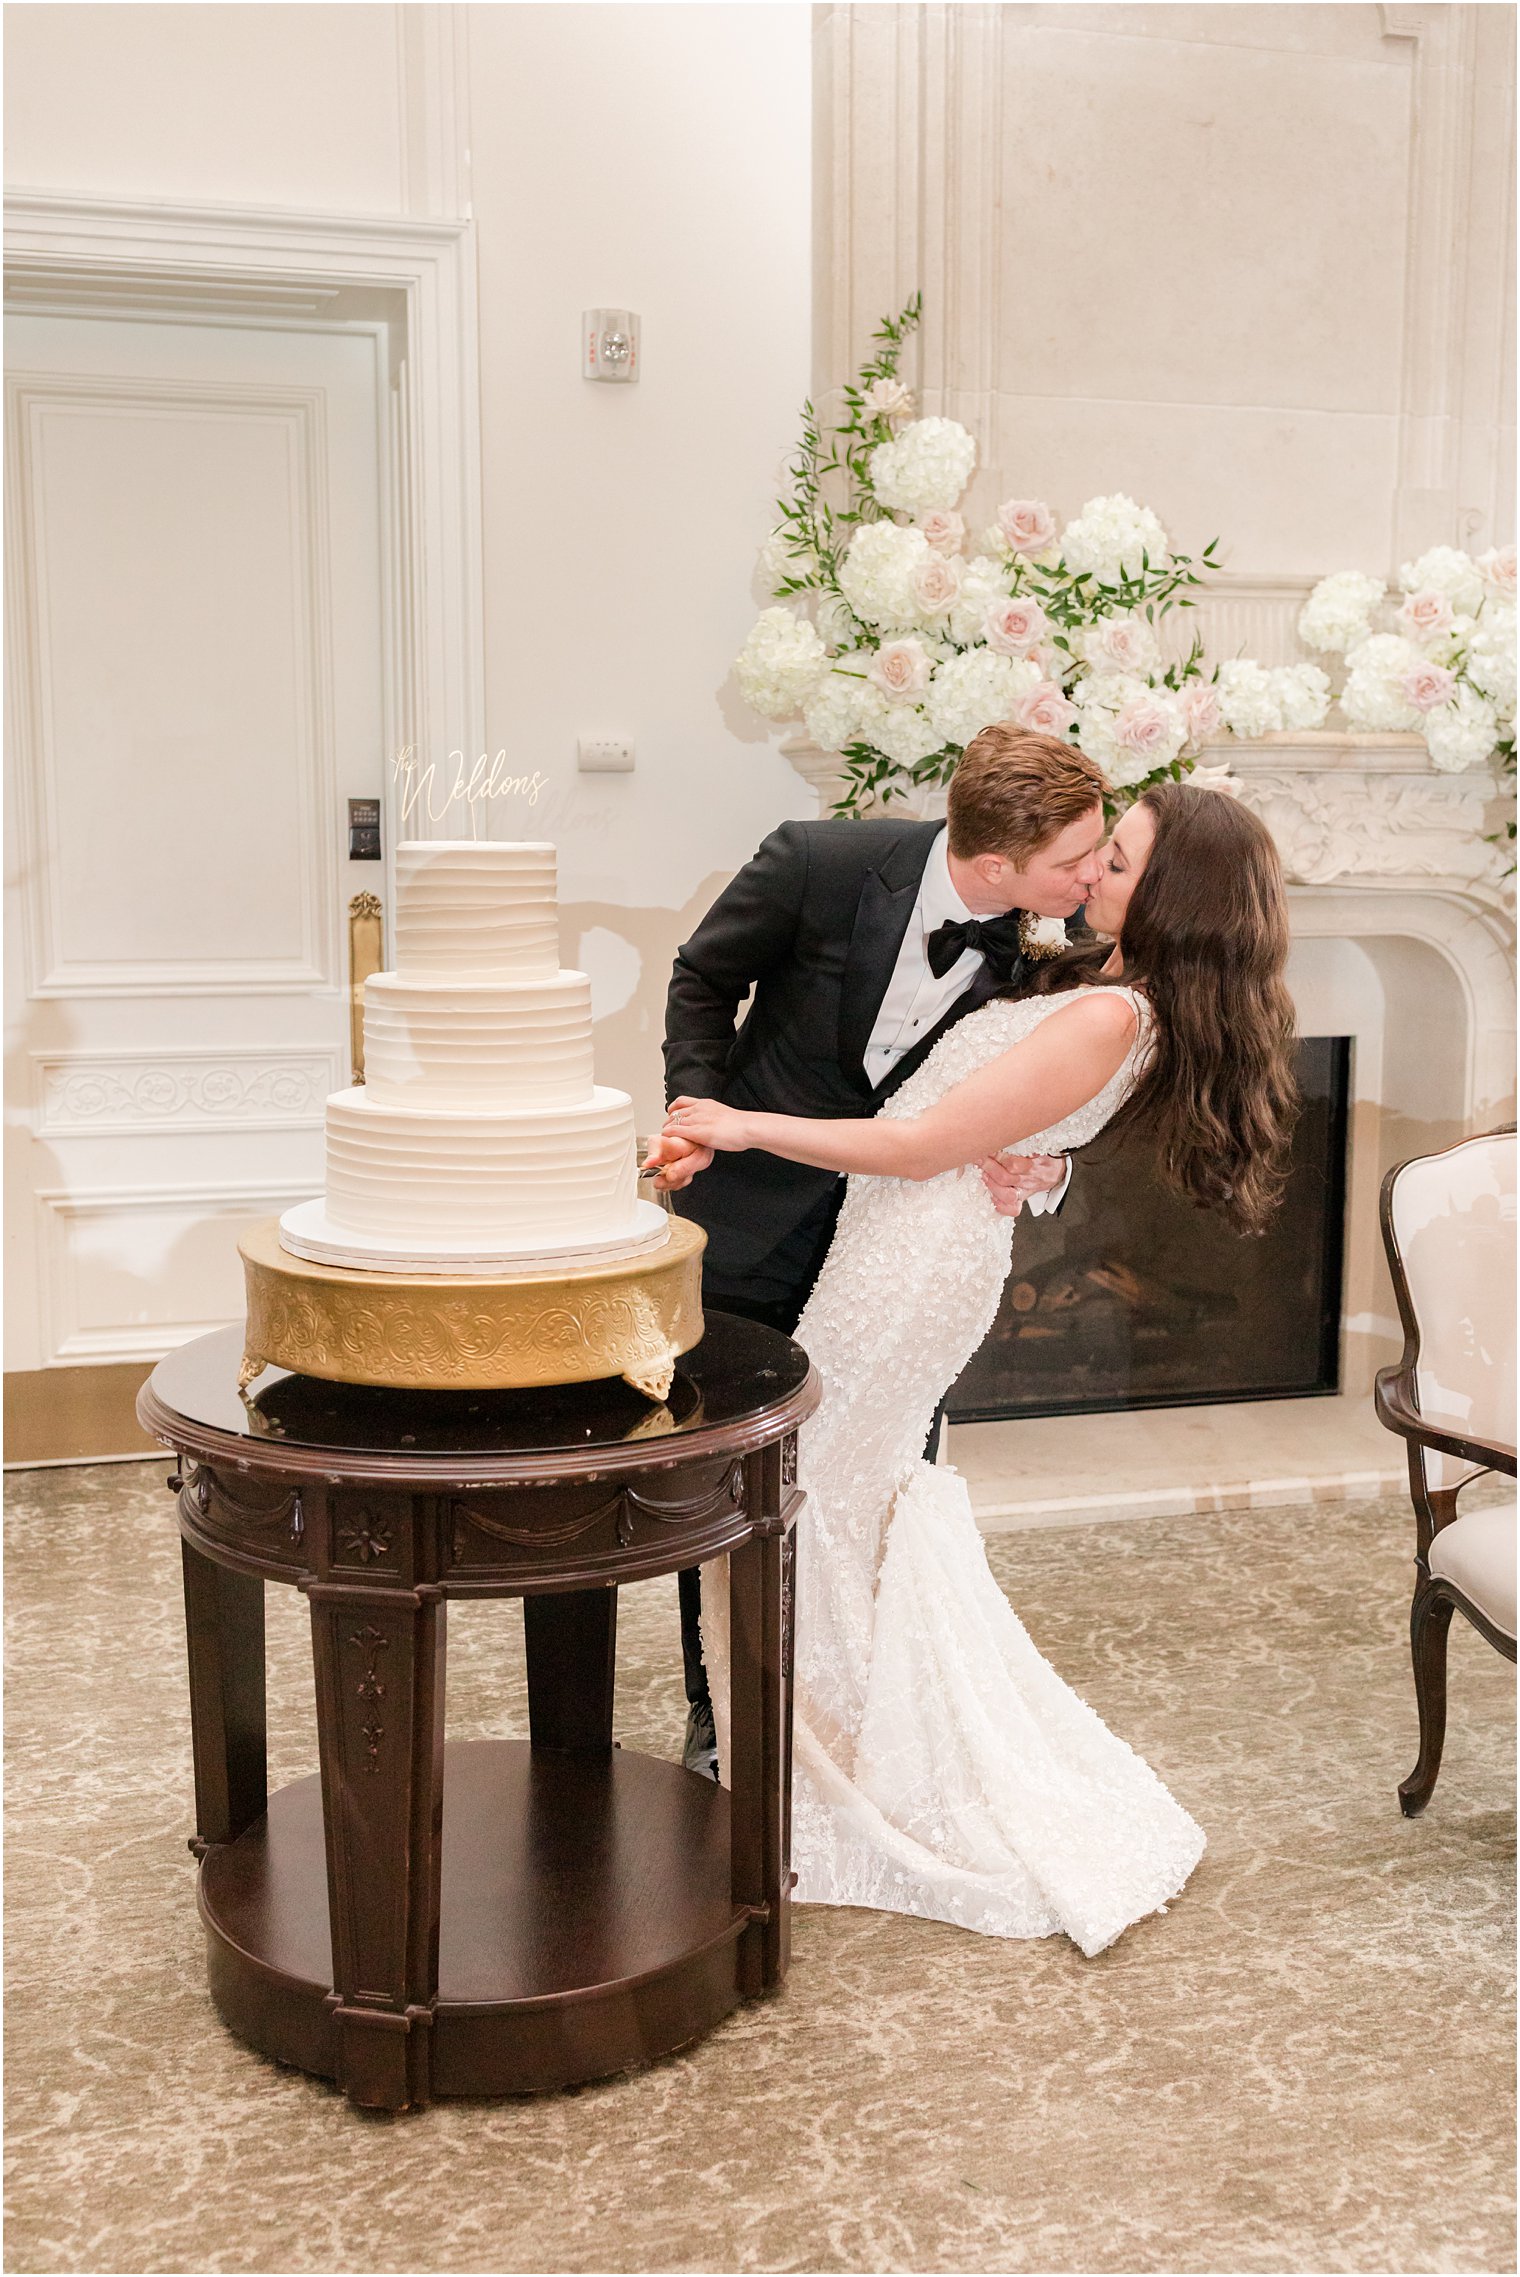 bride and groom kiss while cutting wedding cake at East Brunswick NJ wedding reception 